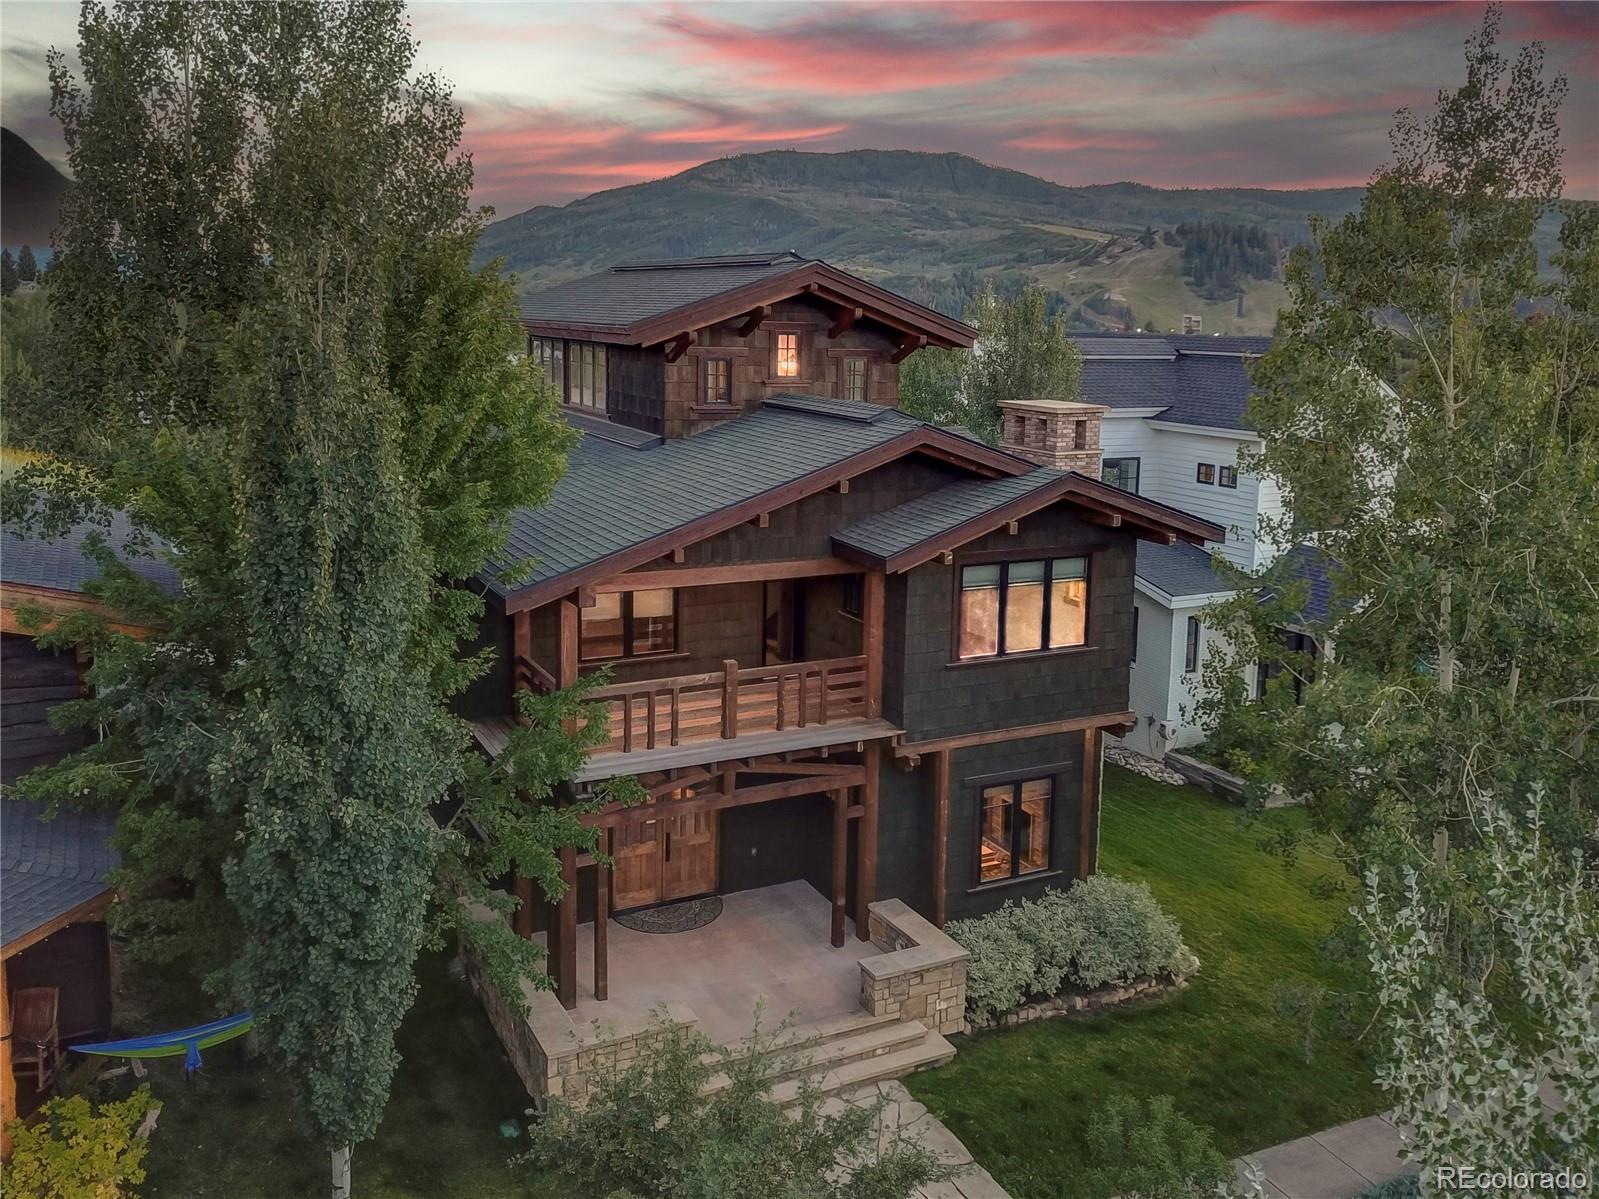 71 Park, Steamboat Springs, CO